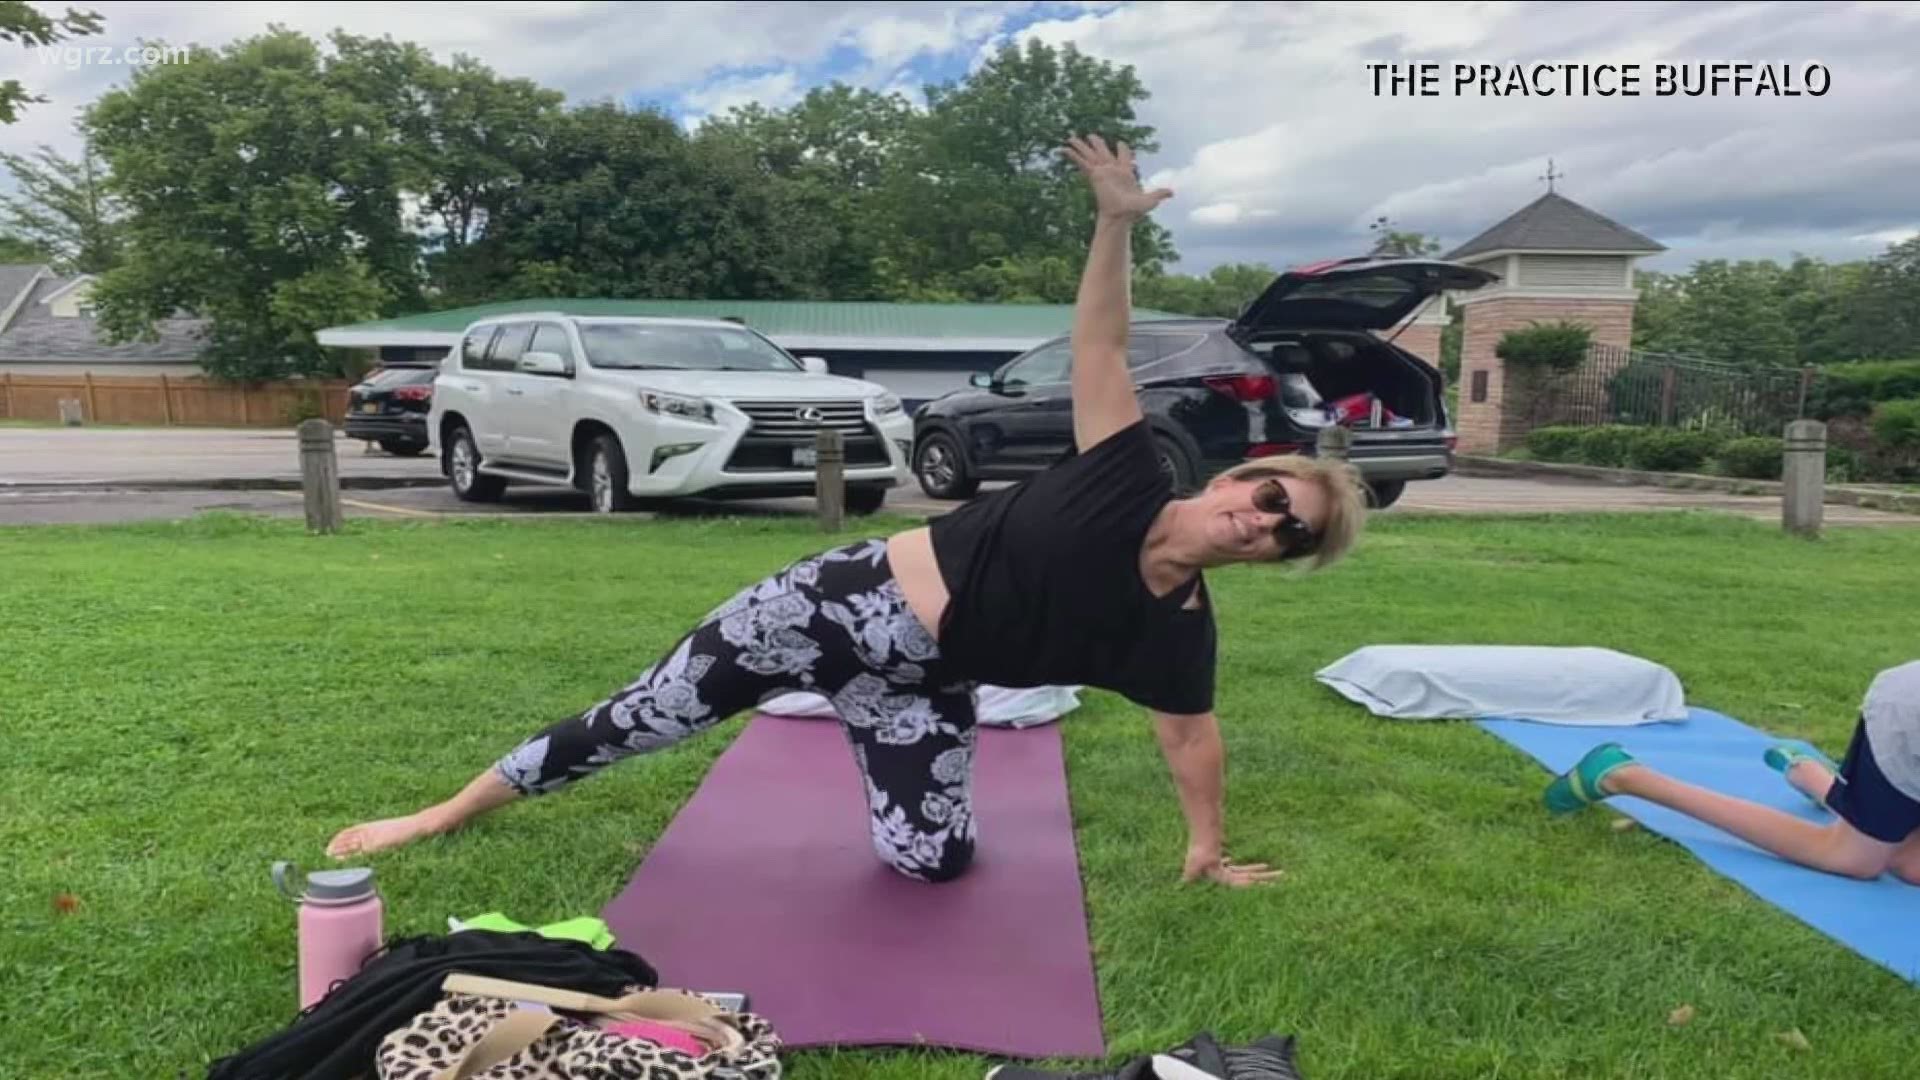 Yoga class for people of all abilities celebrates strength and